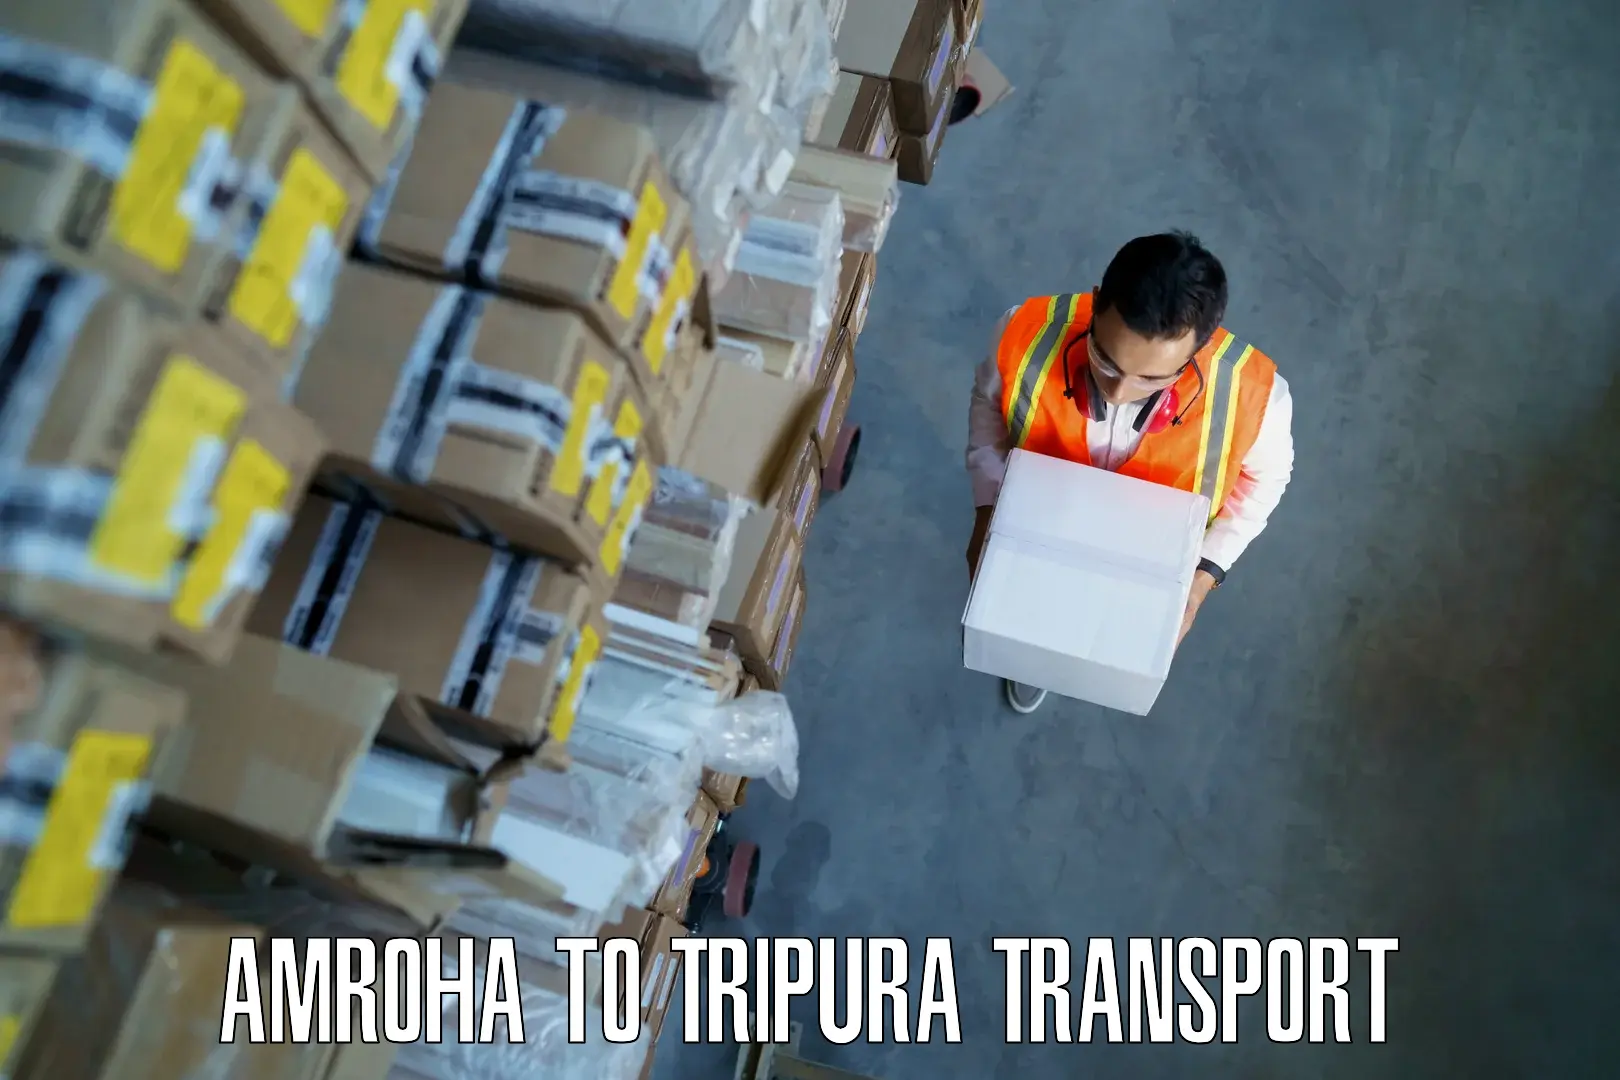 Domestic transport services Amroha to Udaipur Tripura